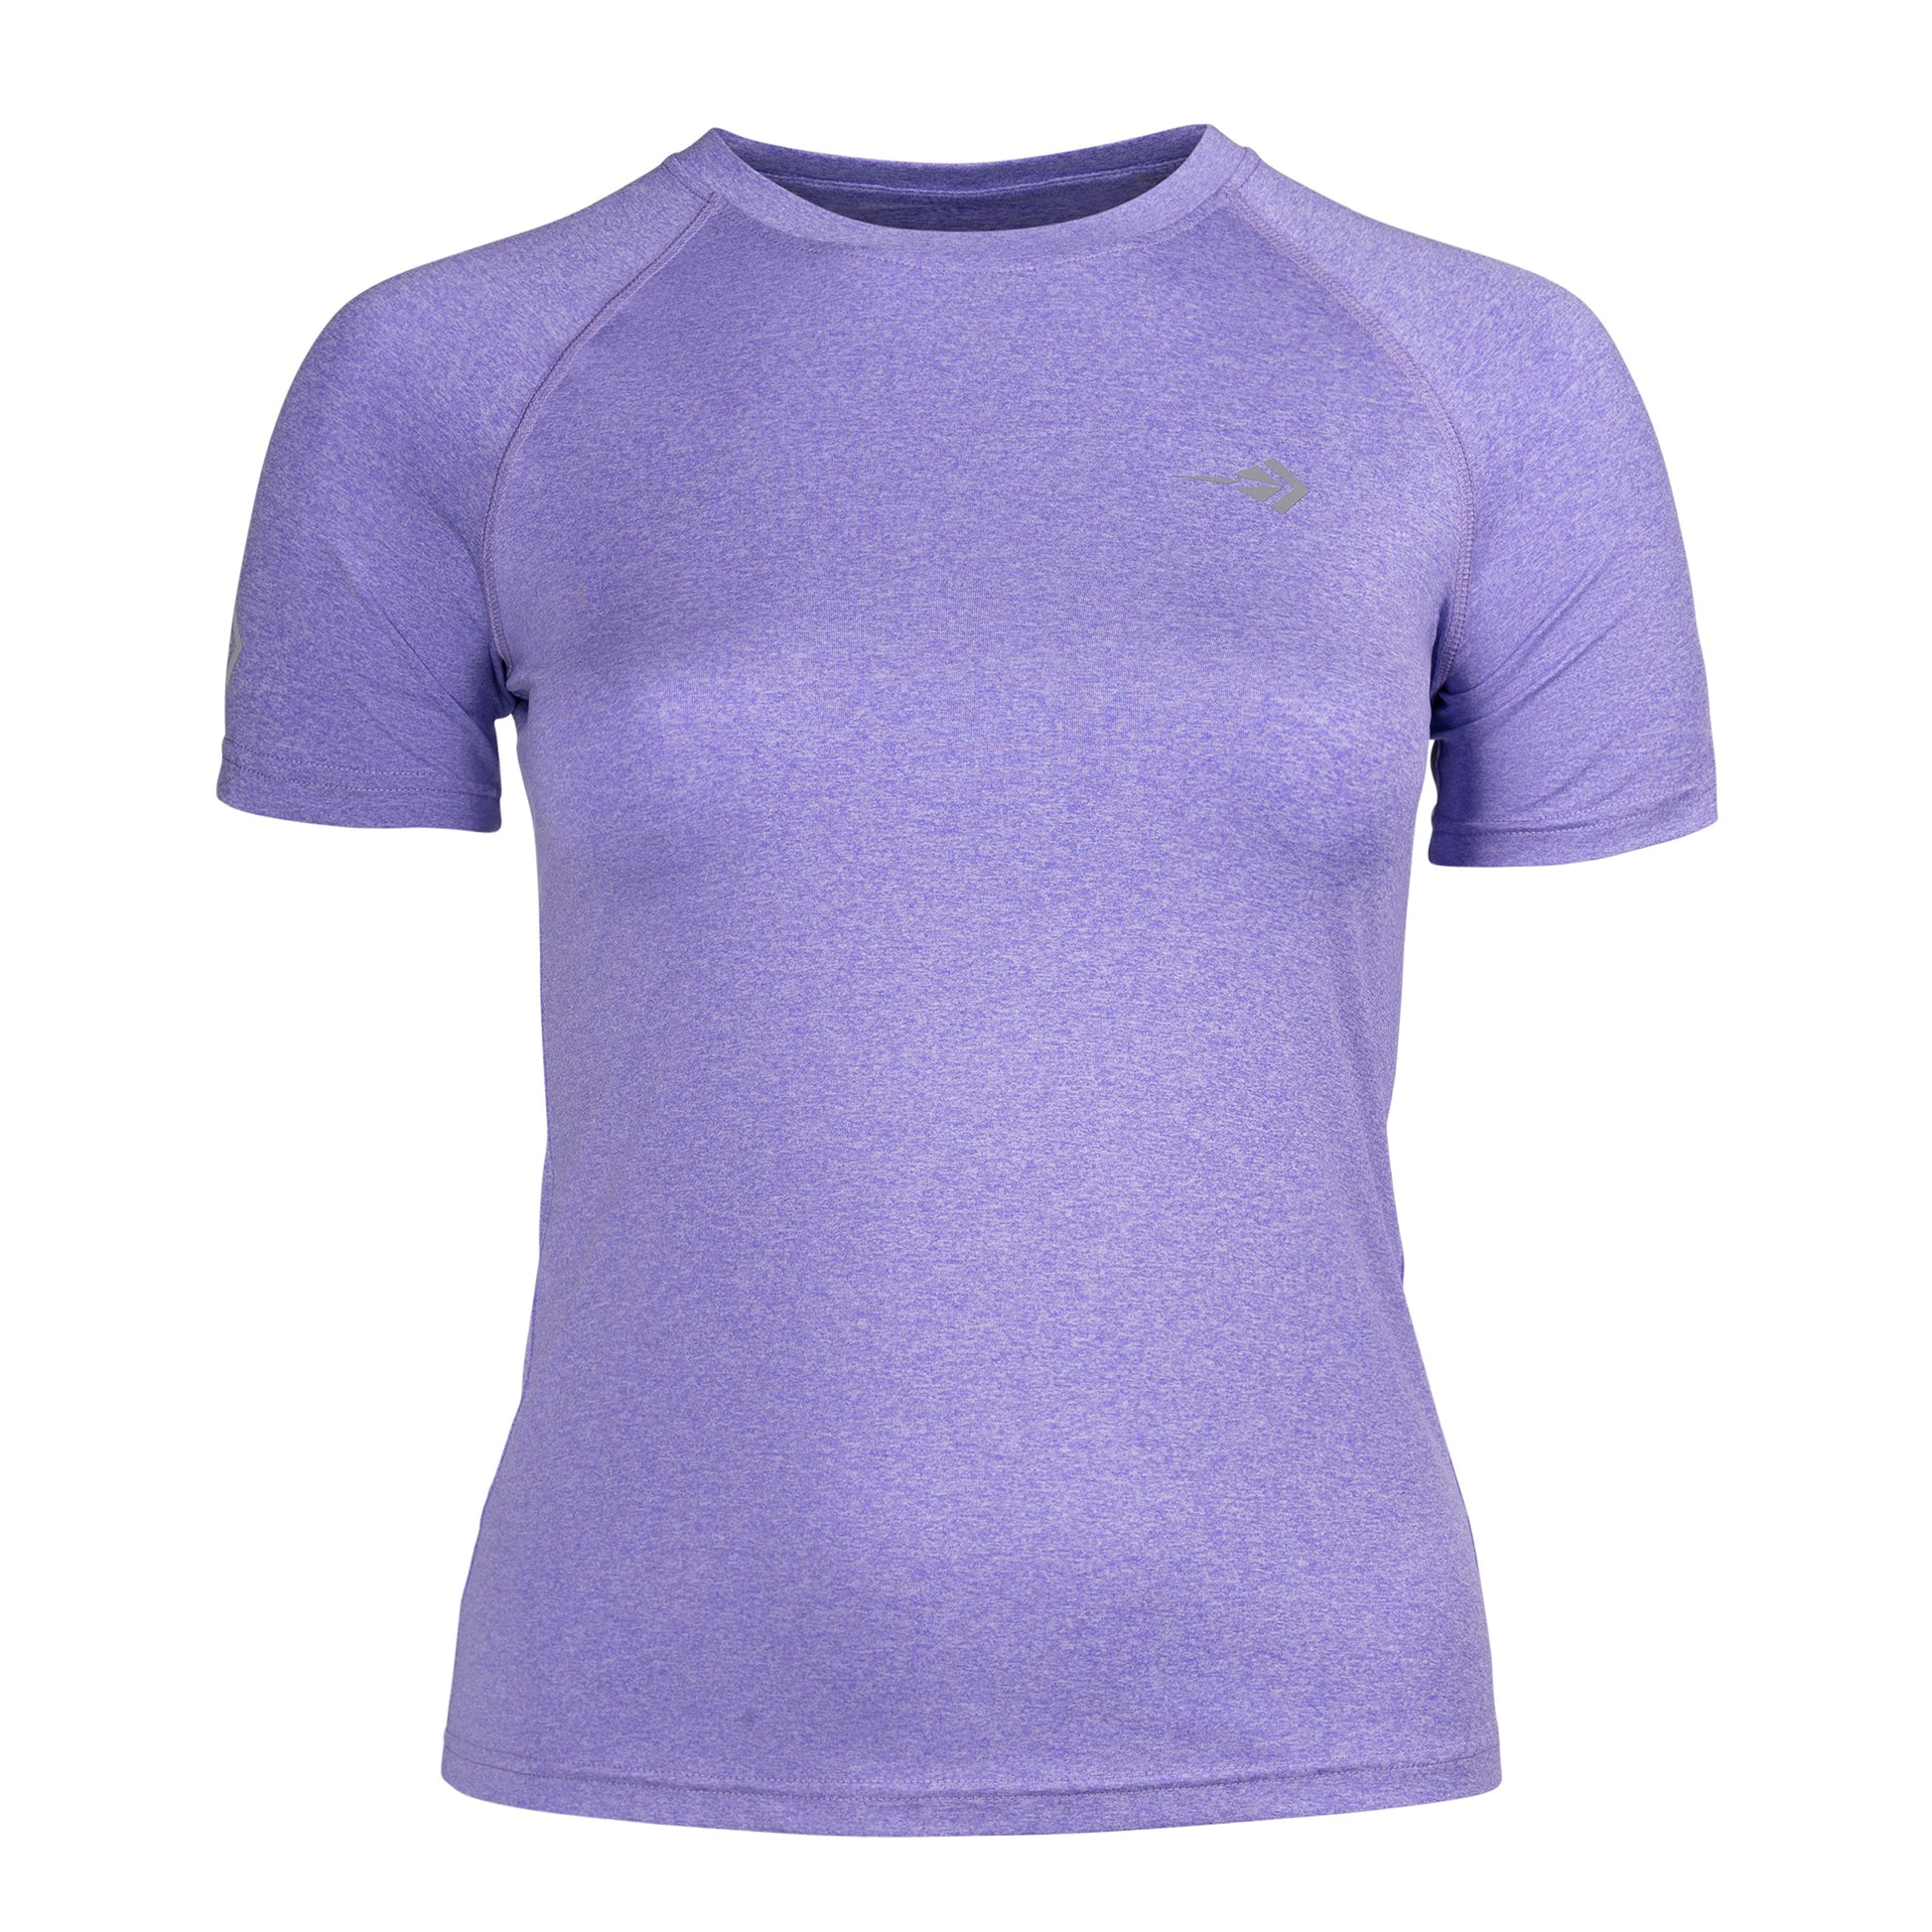 Women's Dry Fit Running Athletic T-Shirts Active Mesh Tee Shirt - Grey / XS